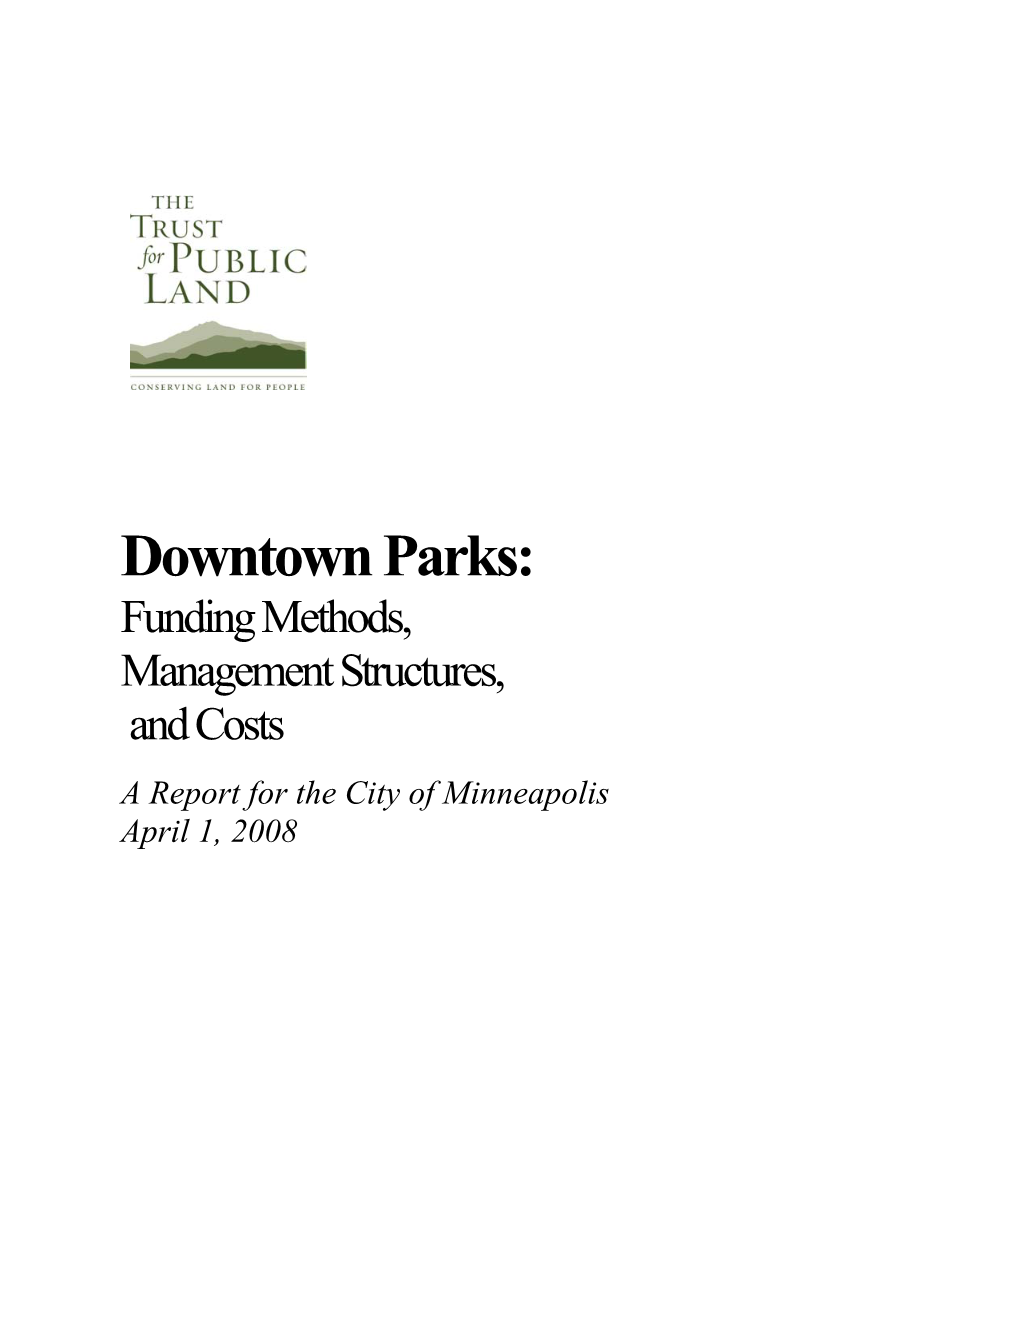 Downtown Parks: Funding Methods, Management Structures, and Costs